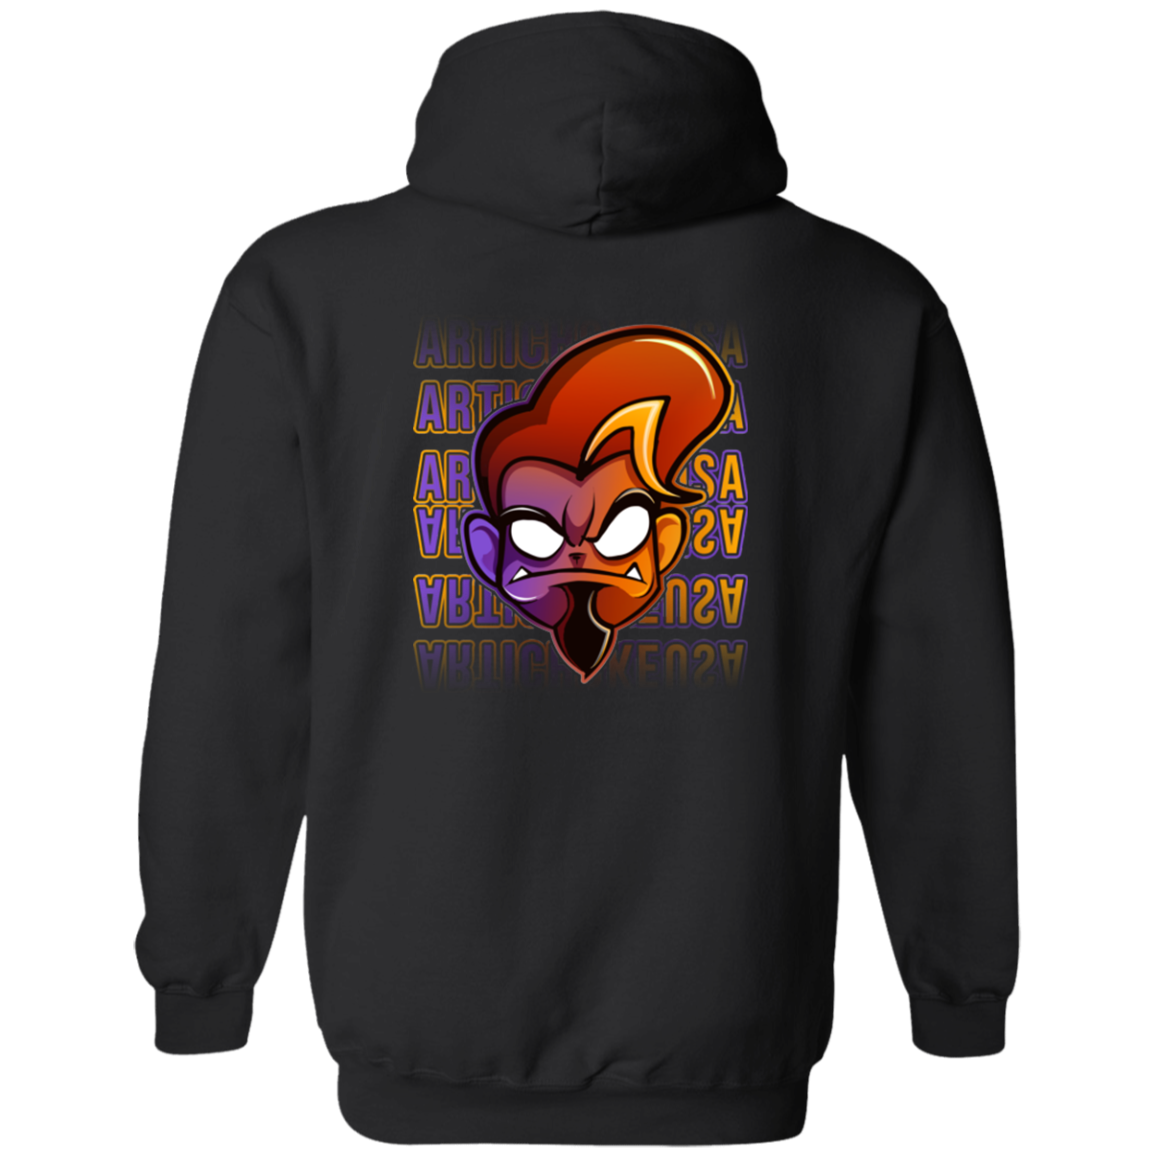 ArtichokeUSA Character and Font design. Let's Create Your Own Team Design Today. Arthur. Zip Up Hooded Sweatshirt